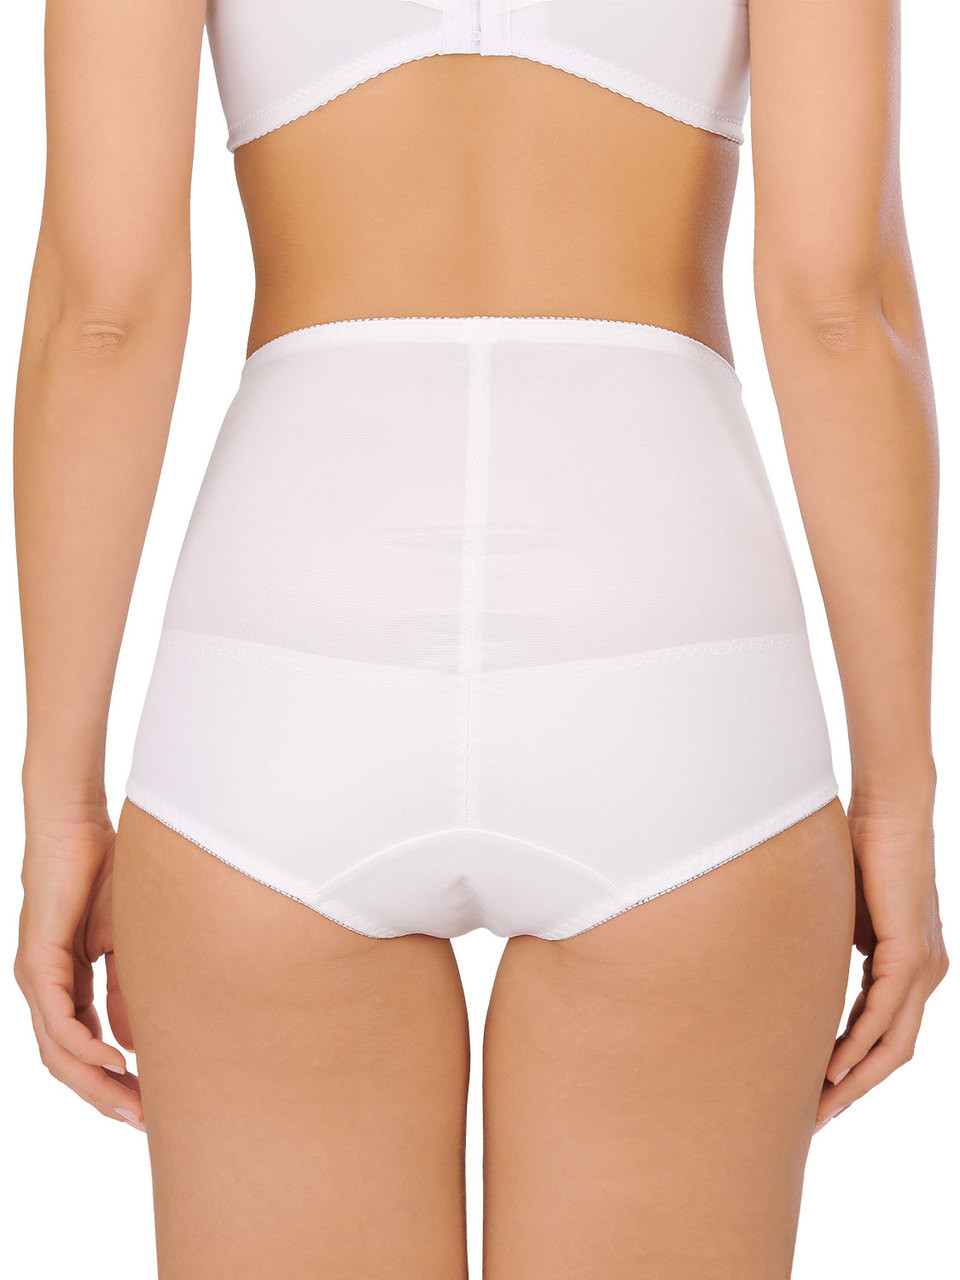 Firm Control Panty Girdle by Naturana